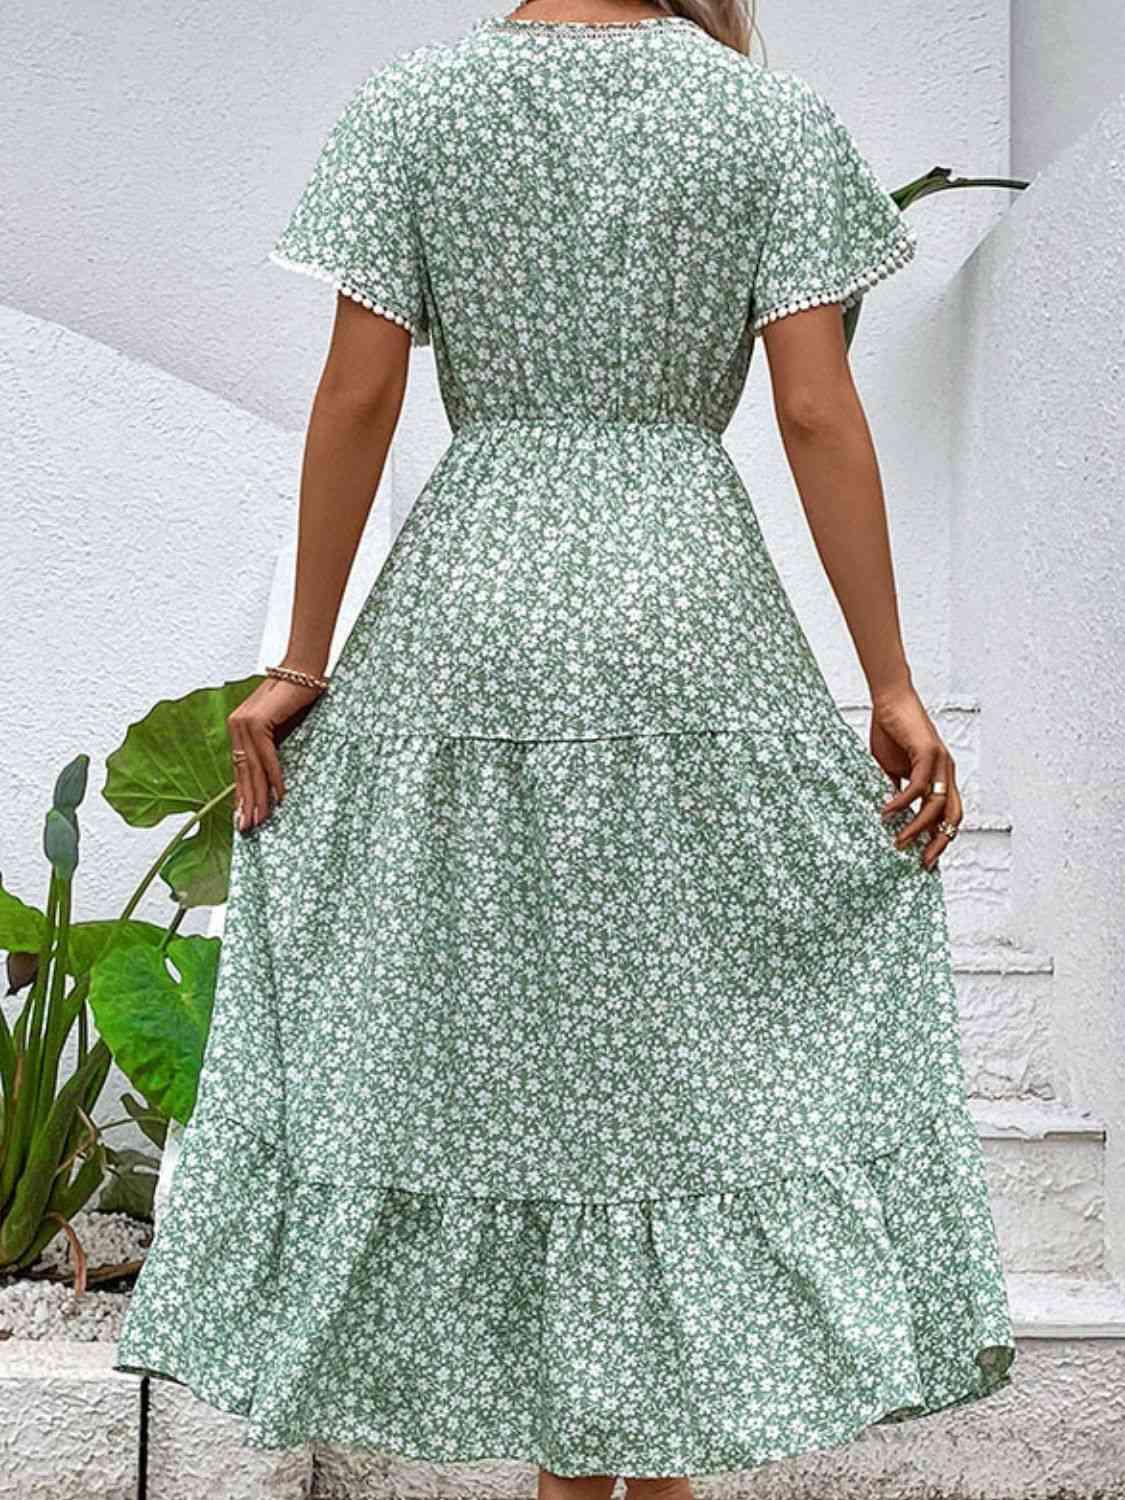 a woman in a green floral dress